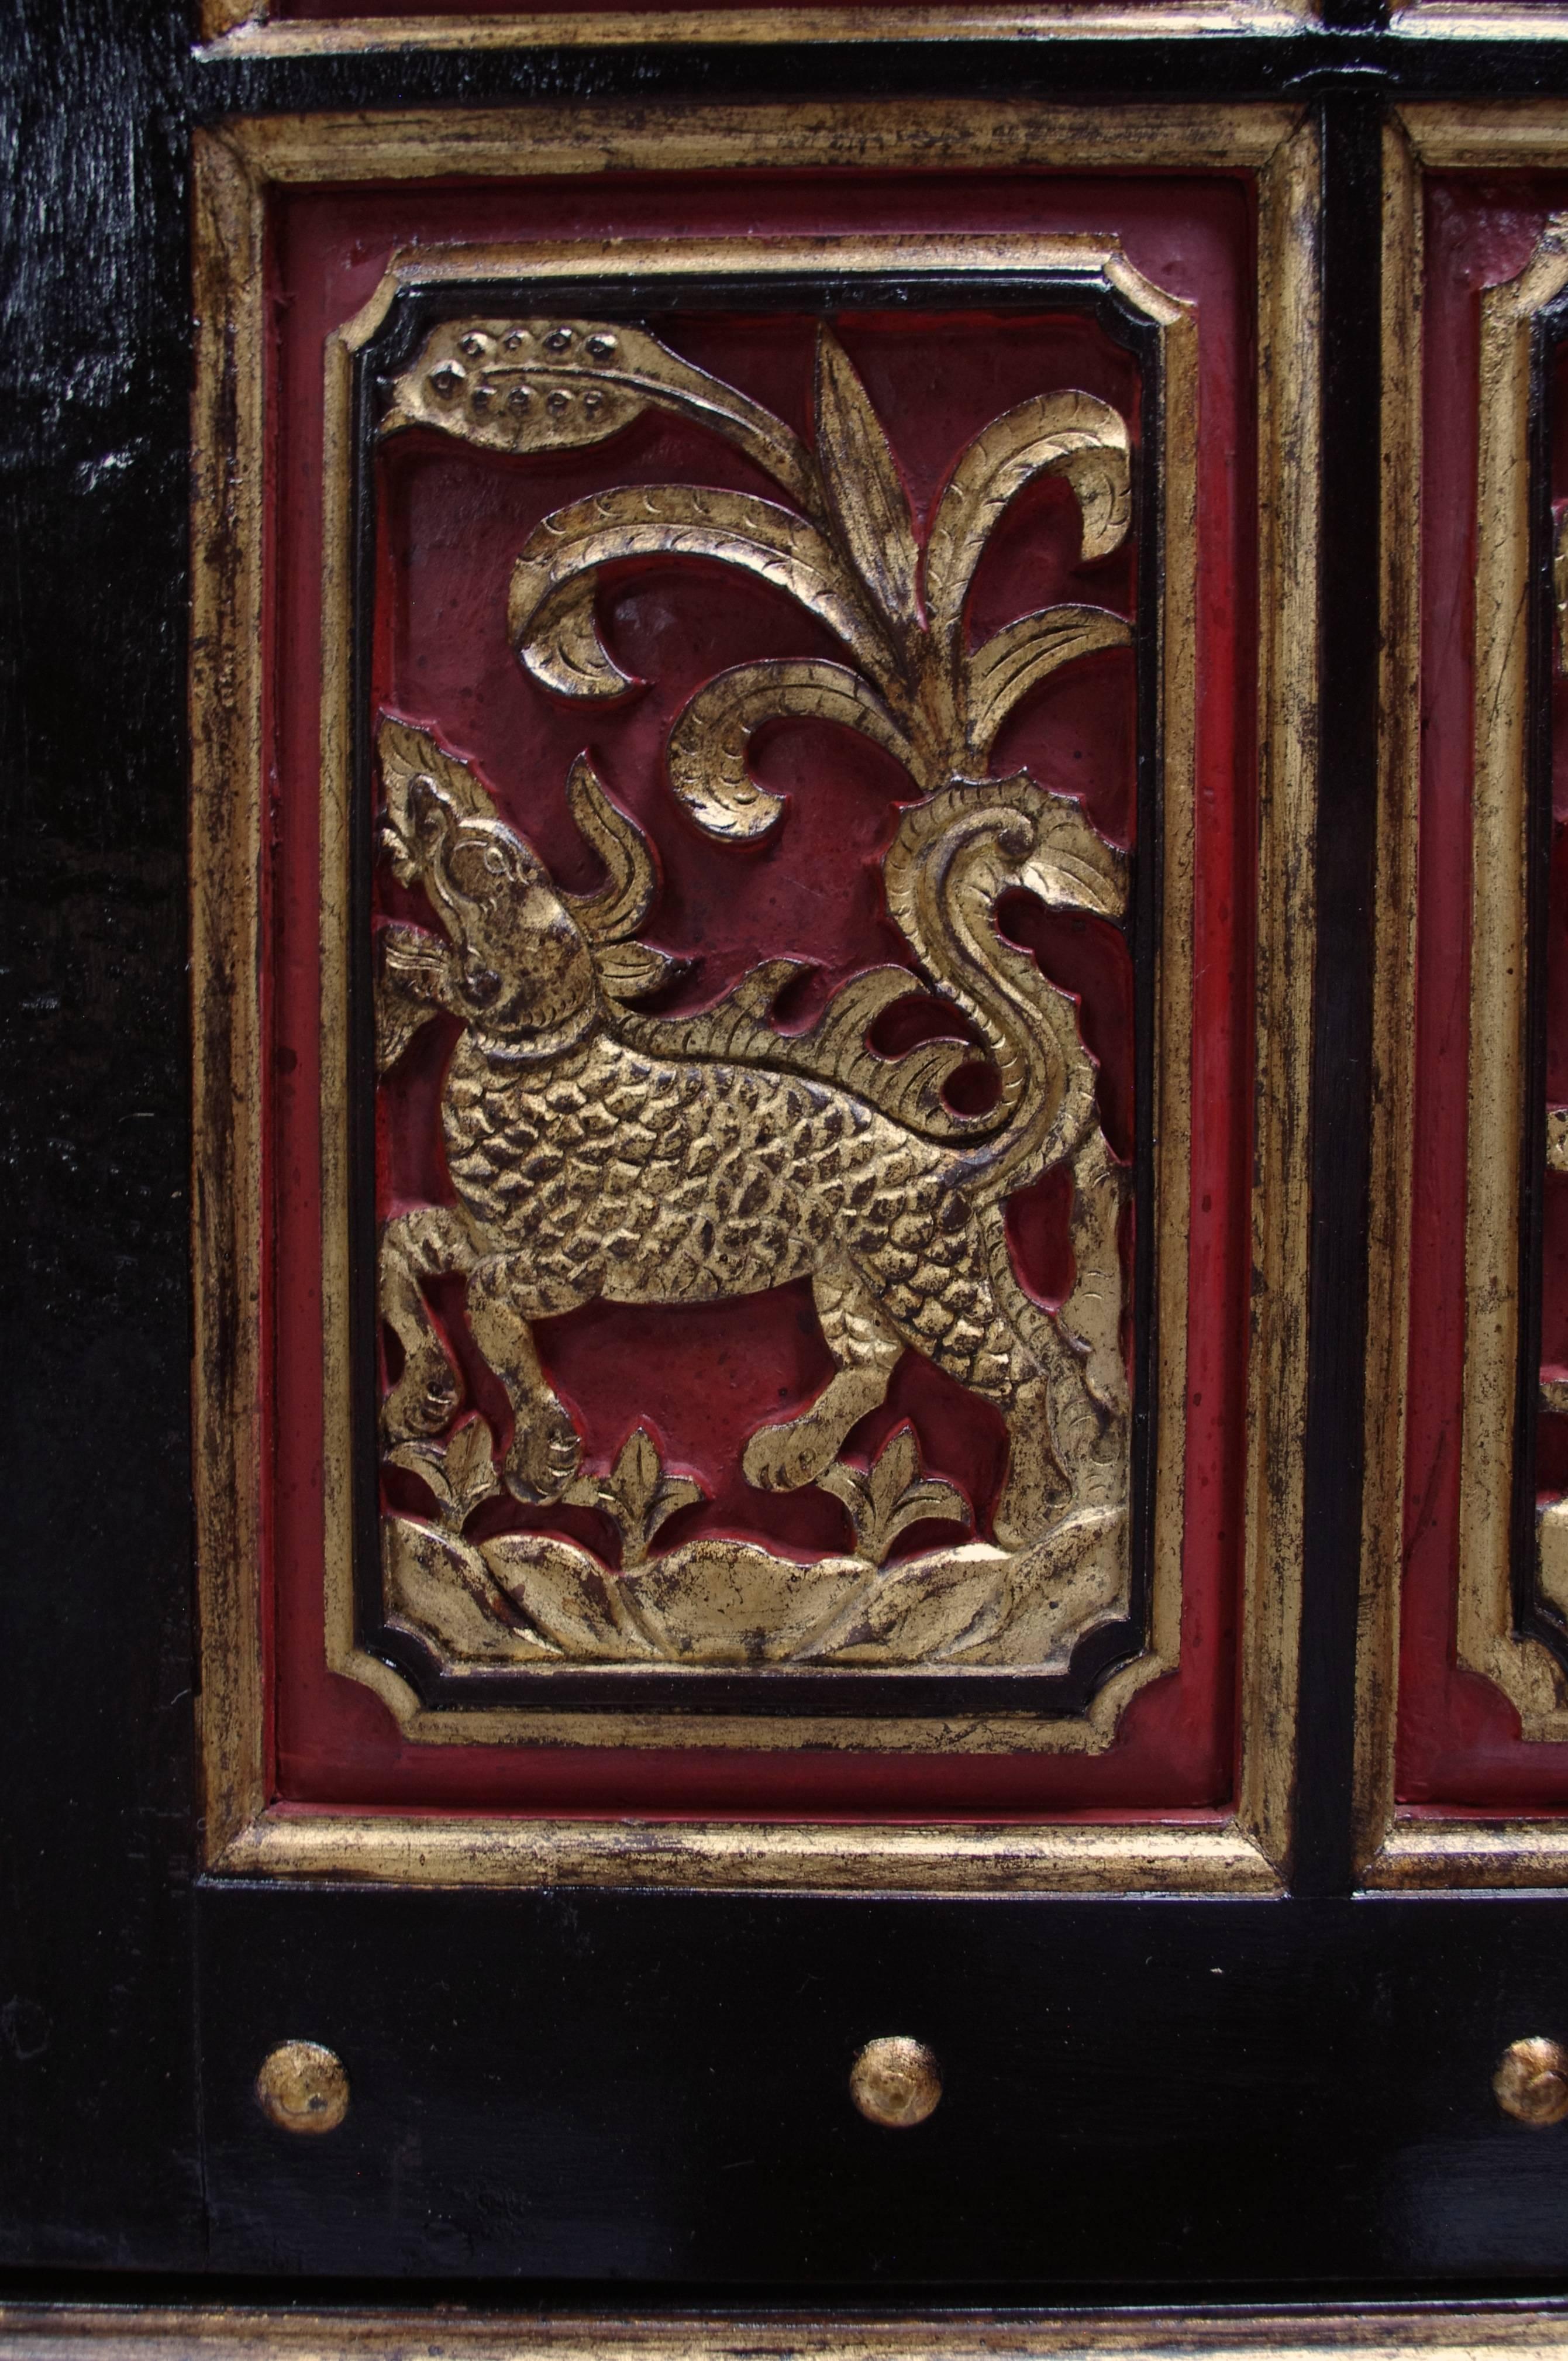 Indo-Dutch work.
Standing on four claws on bowl feet.
Red and black lacquer with gilt highlights.
Opening on two doors and two drawers.
Decorated with sculpted animals and foliage frieze,
1900 period.